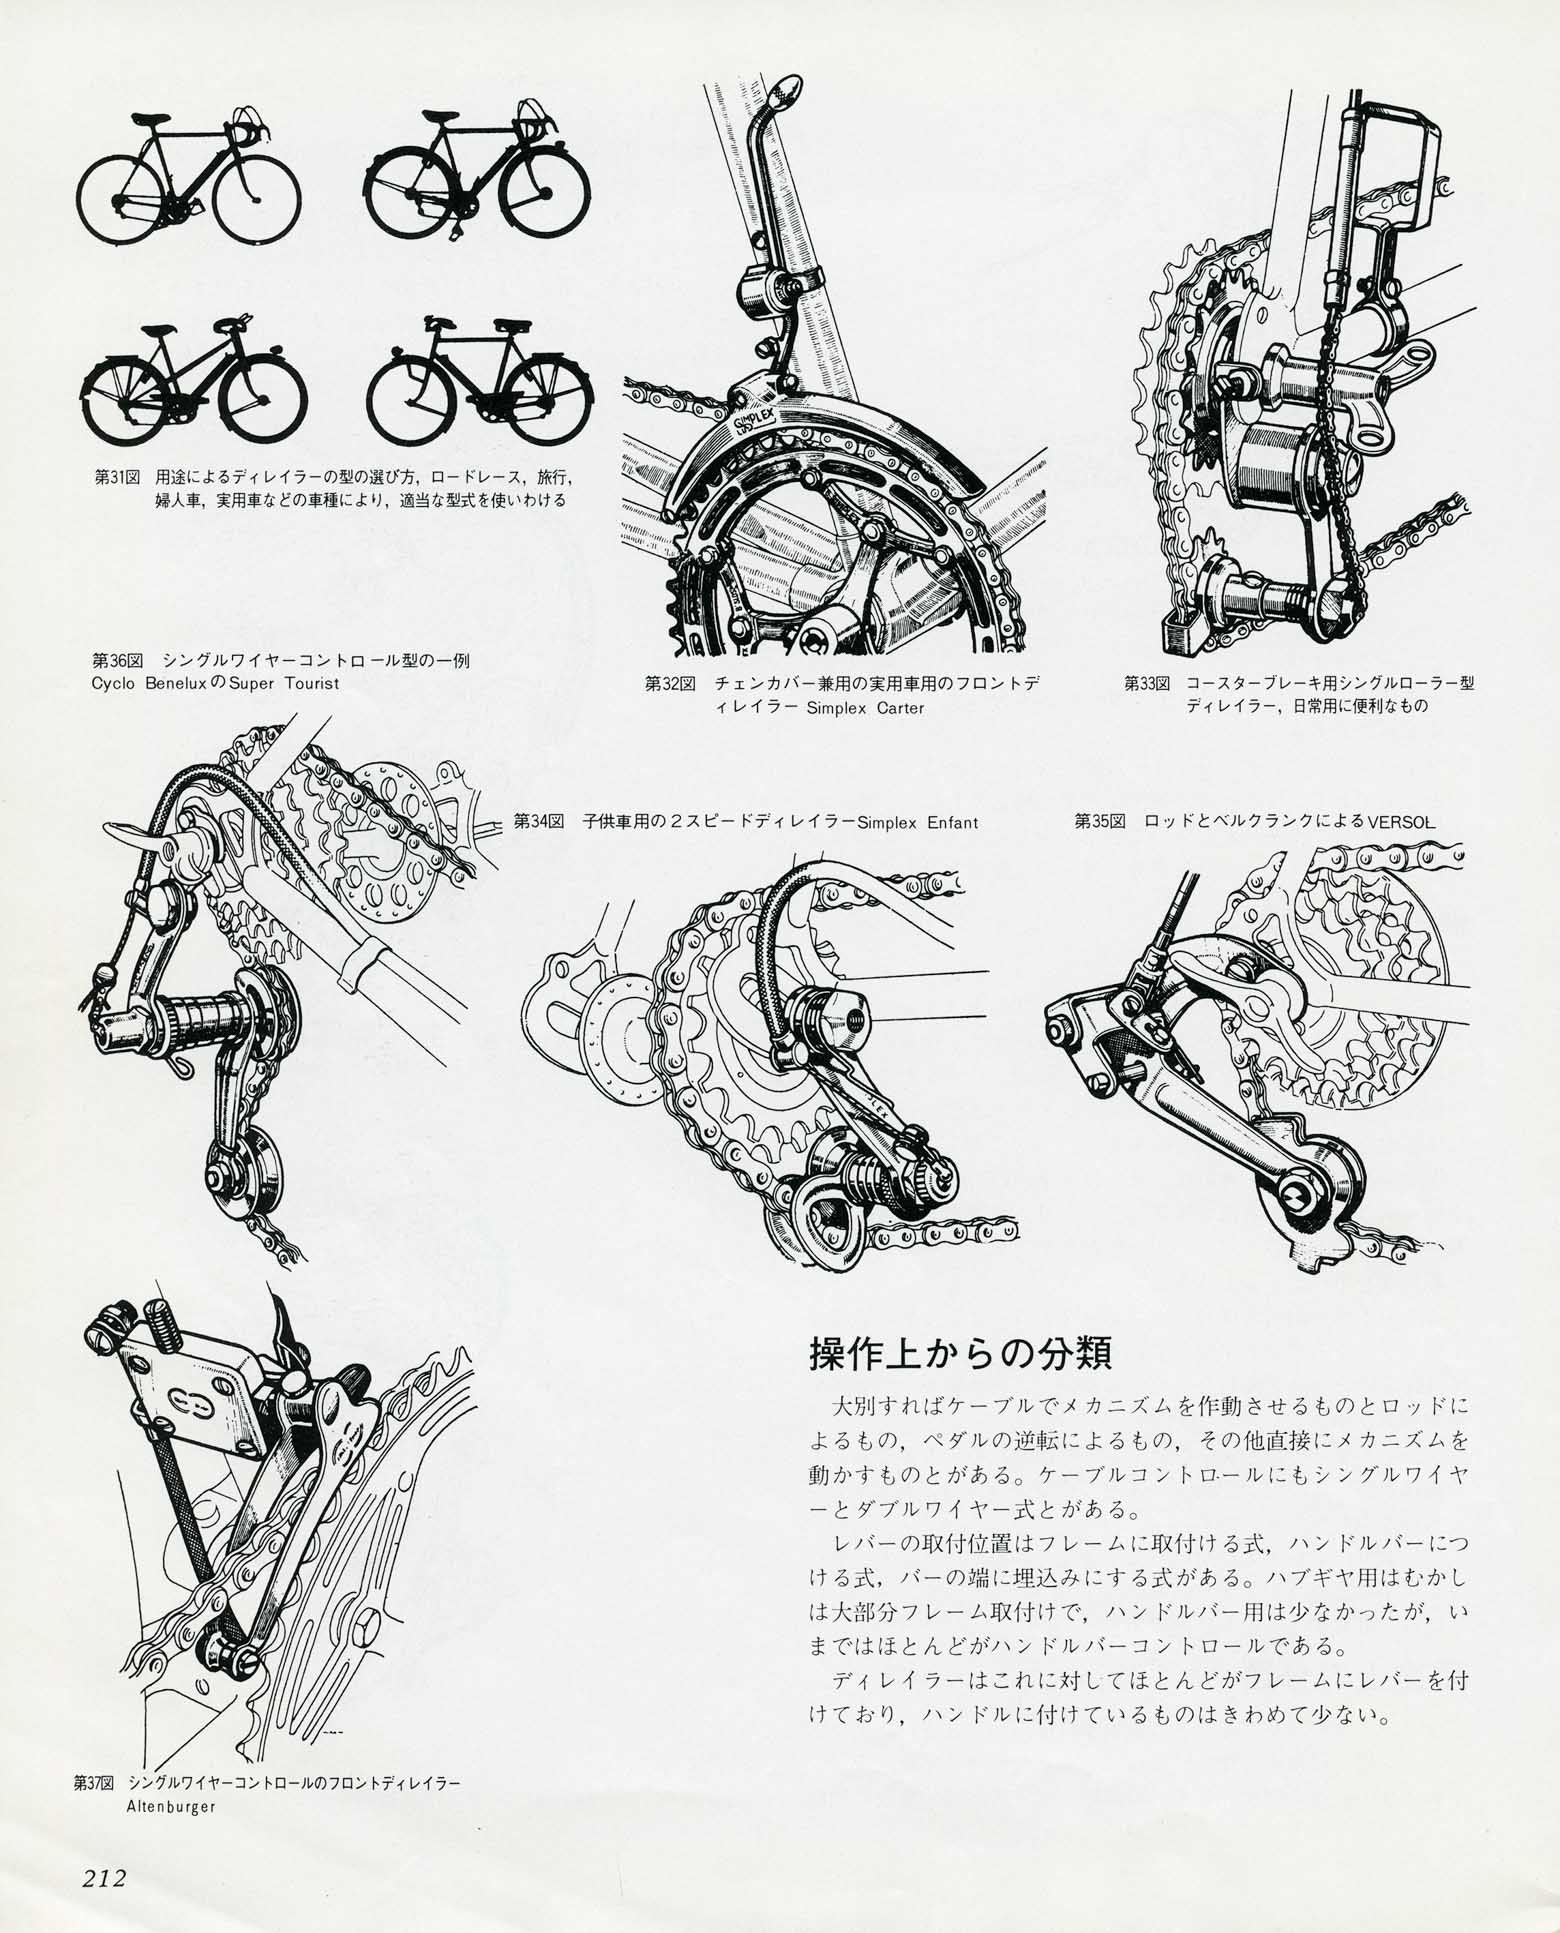 New Cycling May 1981 - Derailleur Collection page 212 main image